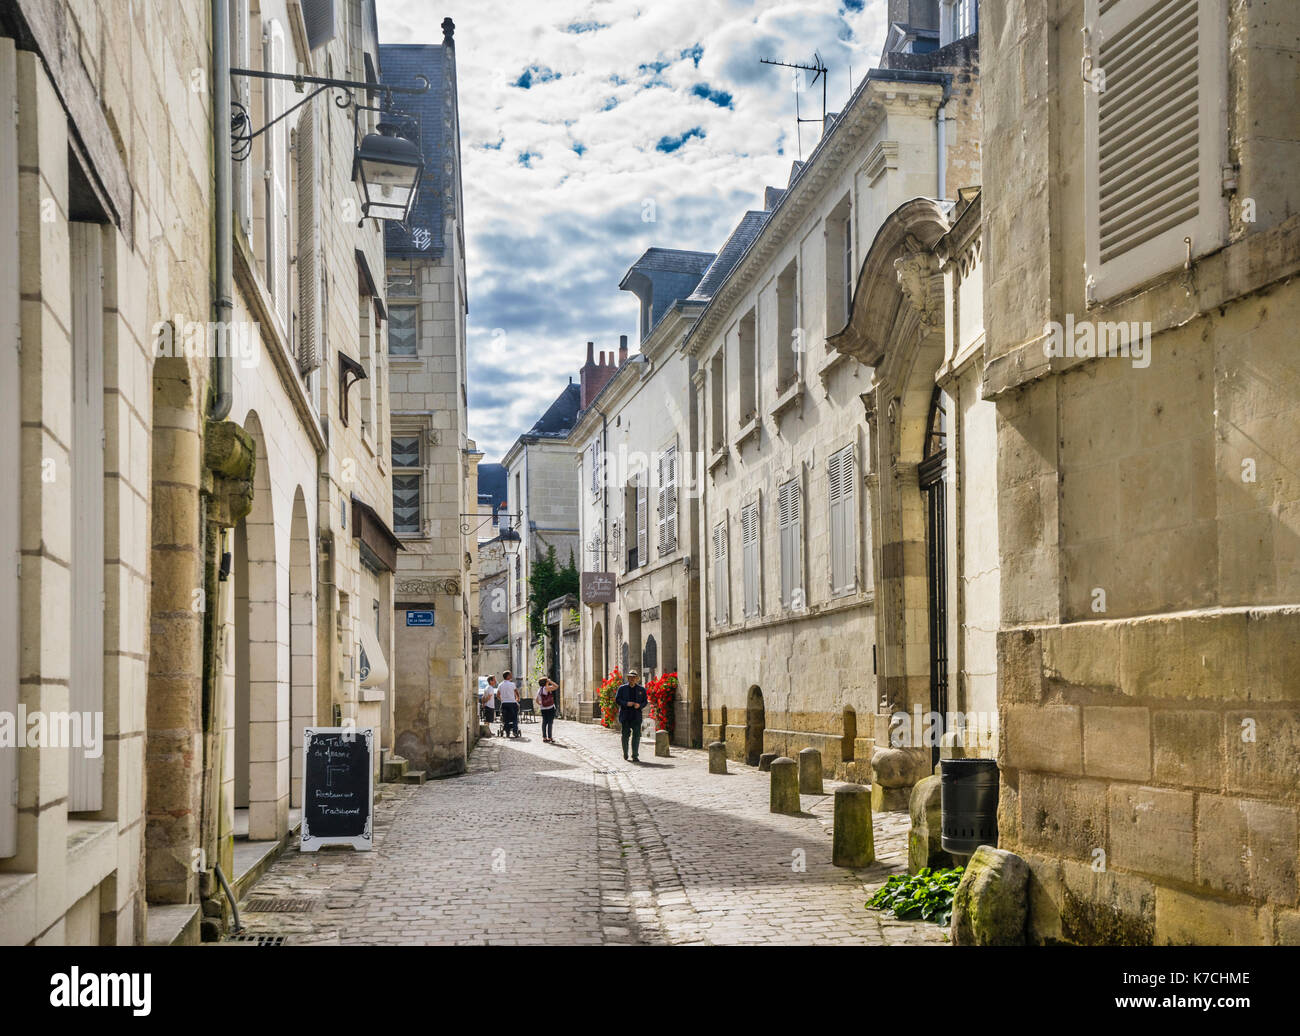 France, Centre-Val de Loire, Touraine, Chinon, ancient stone houses made of the local tufa stone at Rue Haute Saint-Maurice Stock Photo